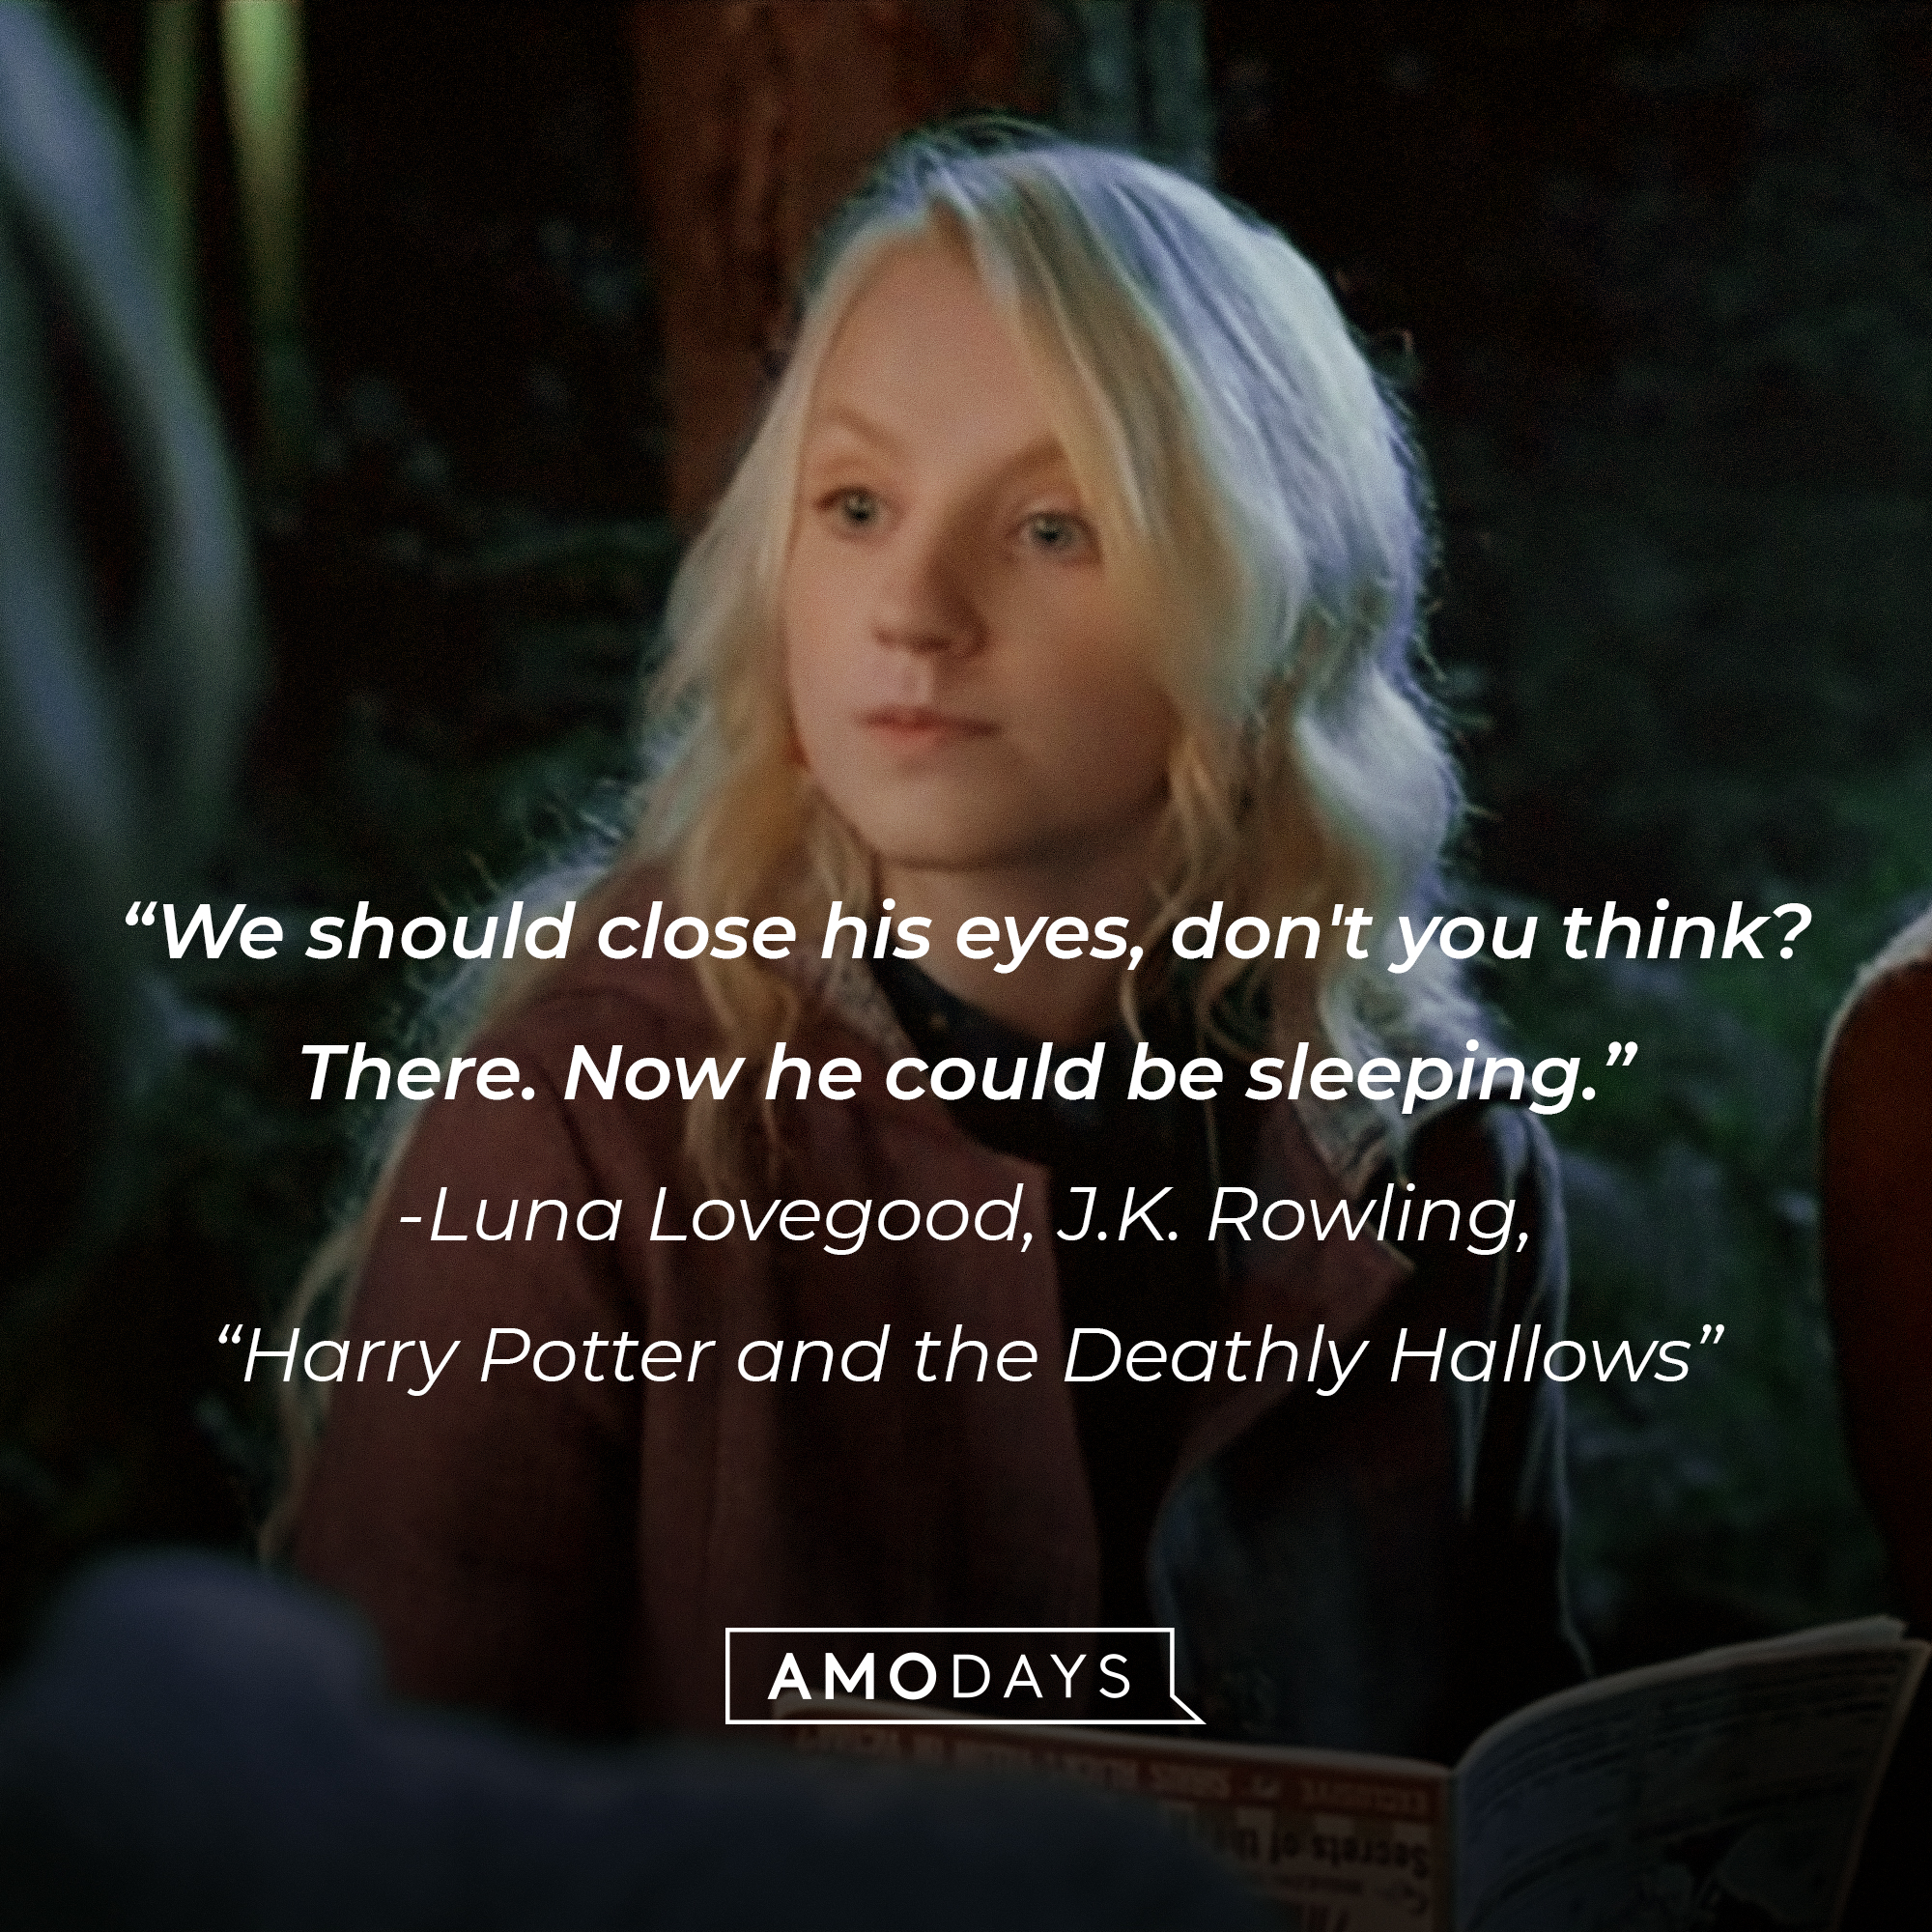 The character Luna Lovegood along with her quote from J.K. Rowling’s “Harry Potter and the Deathly Hallows”: "We should close his eyes, don't you think? There. Now he could be sleeping." | Source: youtube.com/WizardingWorld